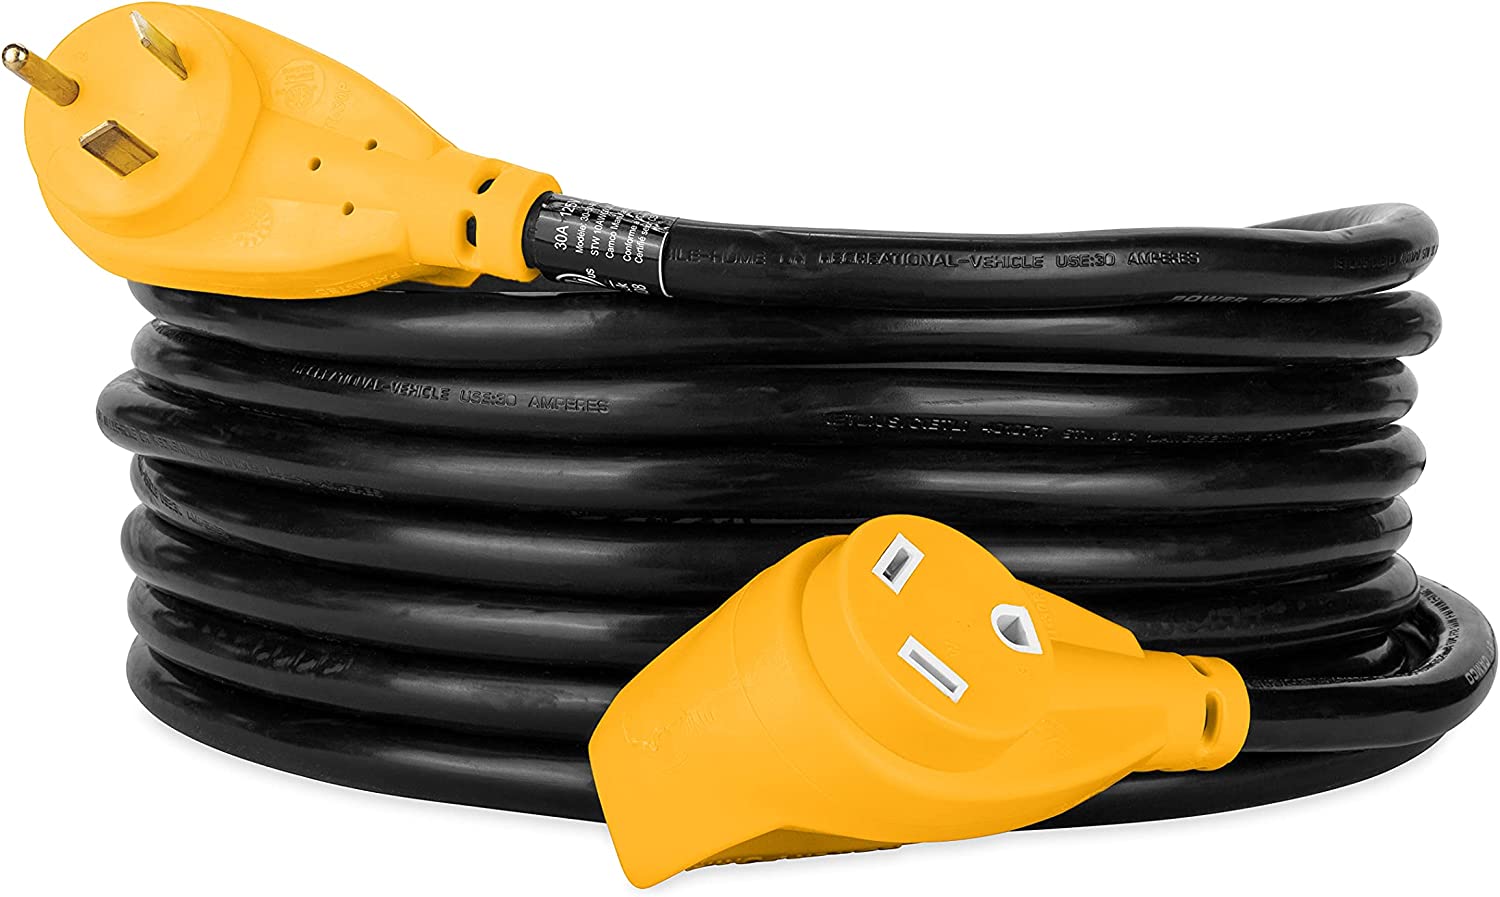 Camco PowerGrip RV Extension Cord | Features Power Grip Handles and an Extremely Flexible Design | 30-Amp, 10-Gauge, 25 Feet (55191) 25' Cord